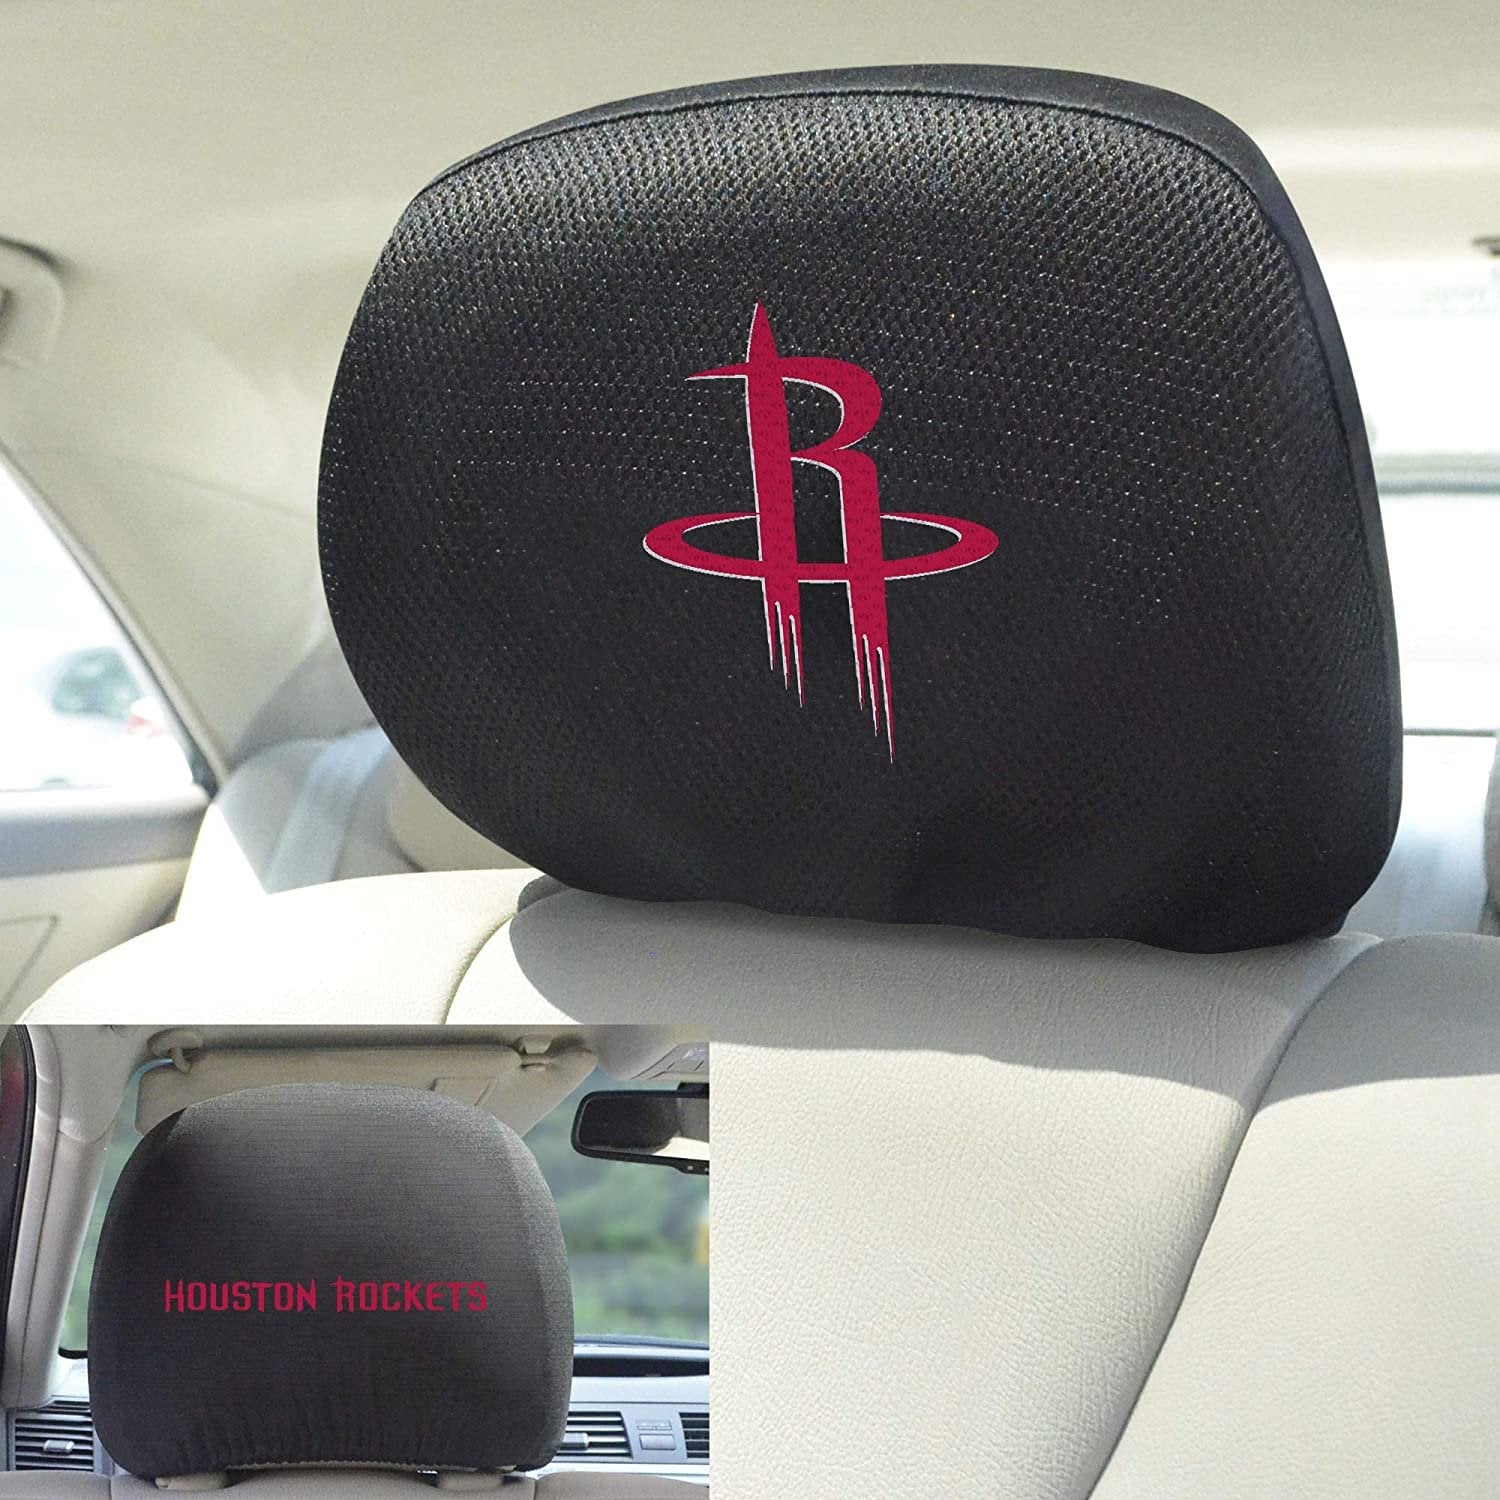 Houston Rockets Pair of Premium Auto Head Rest Covers, Embroidered, Black Elastic, 14x10 Inch